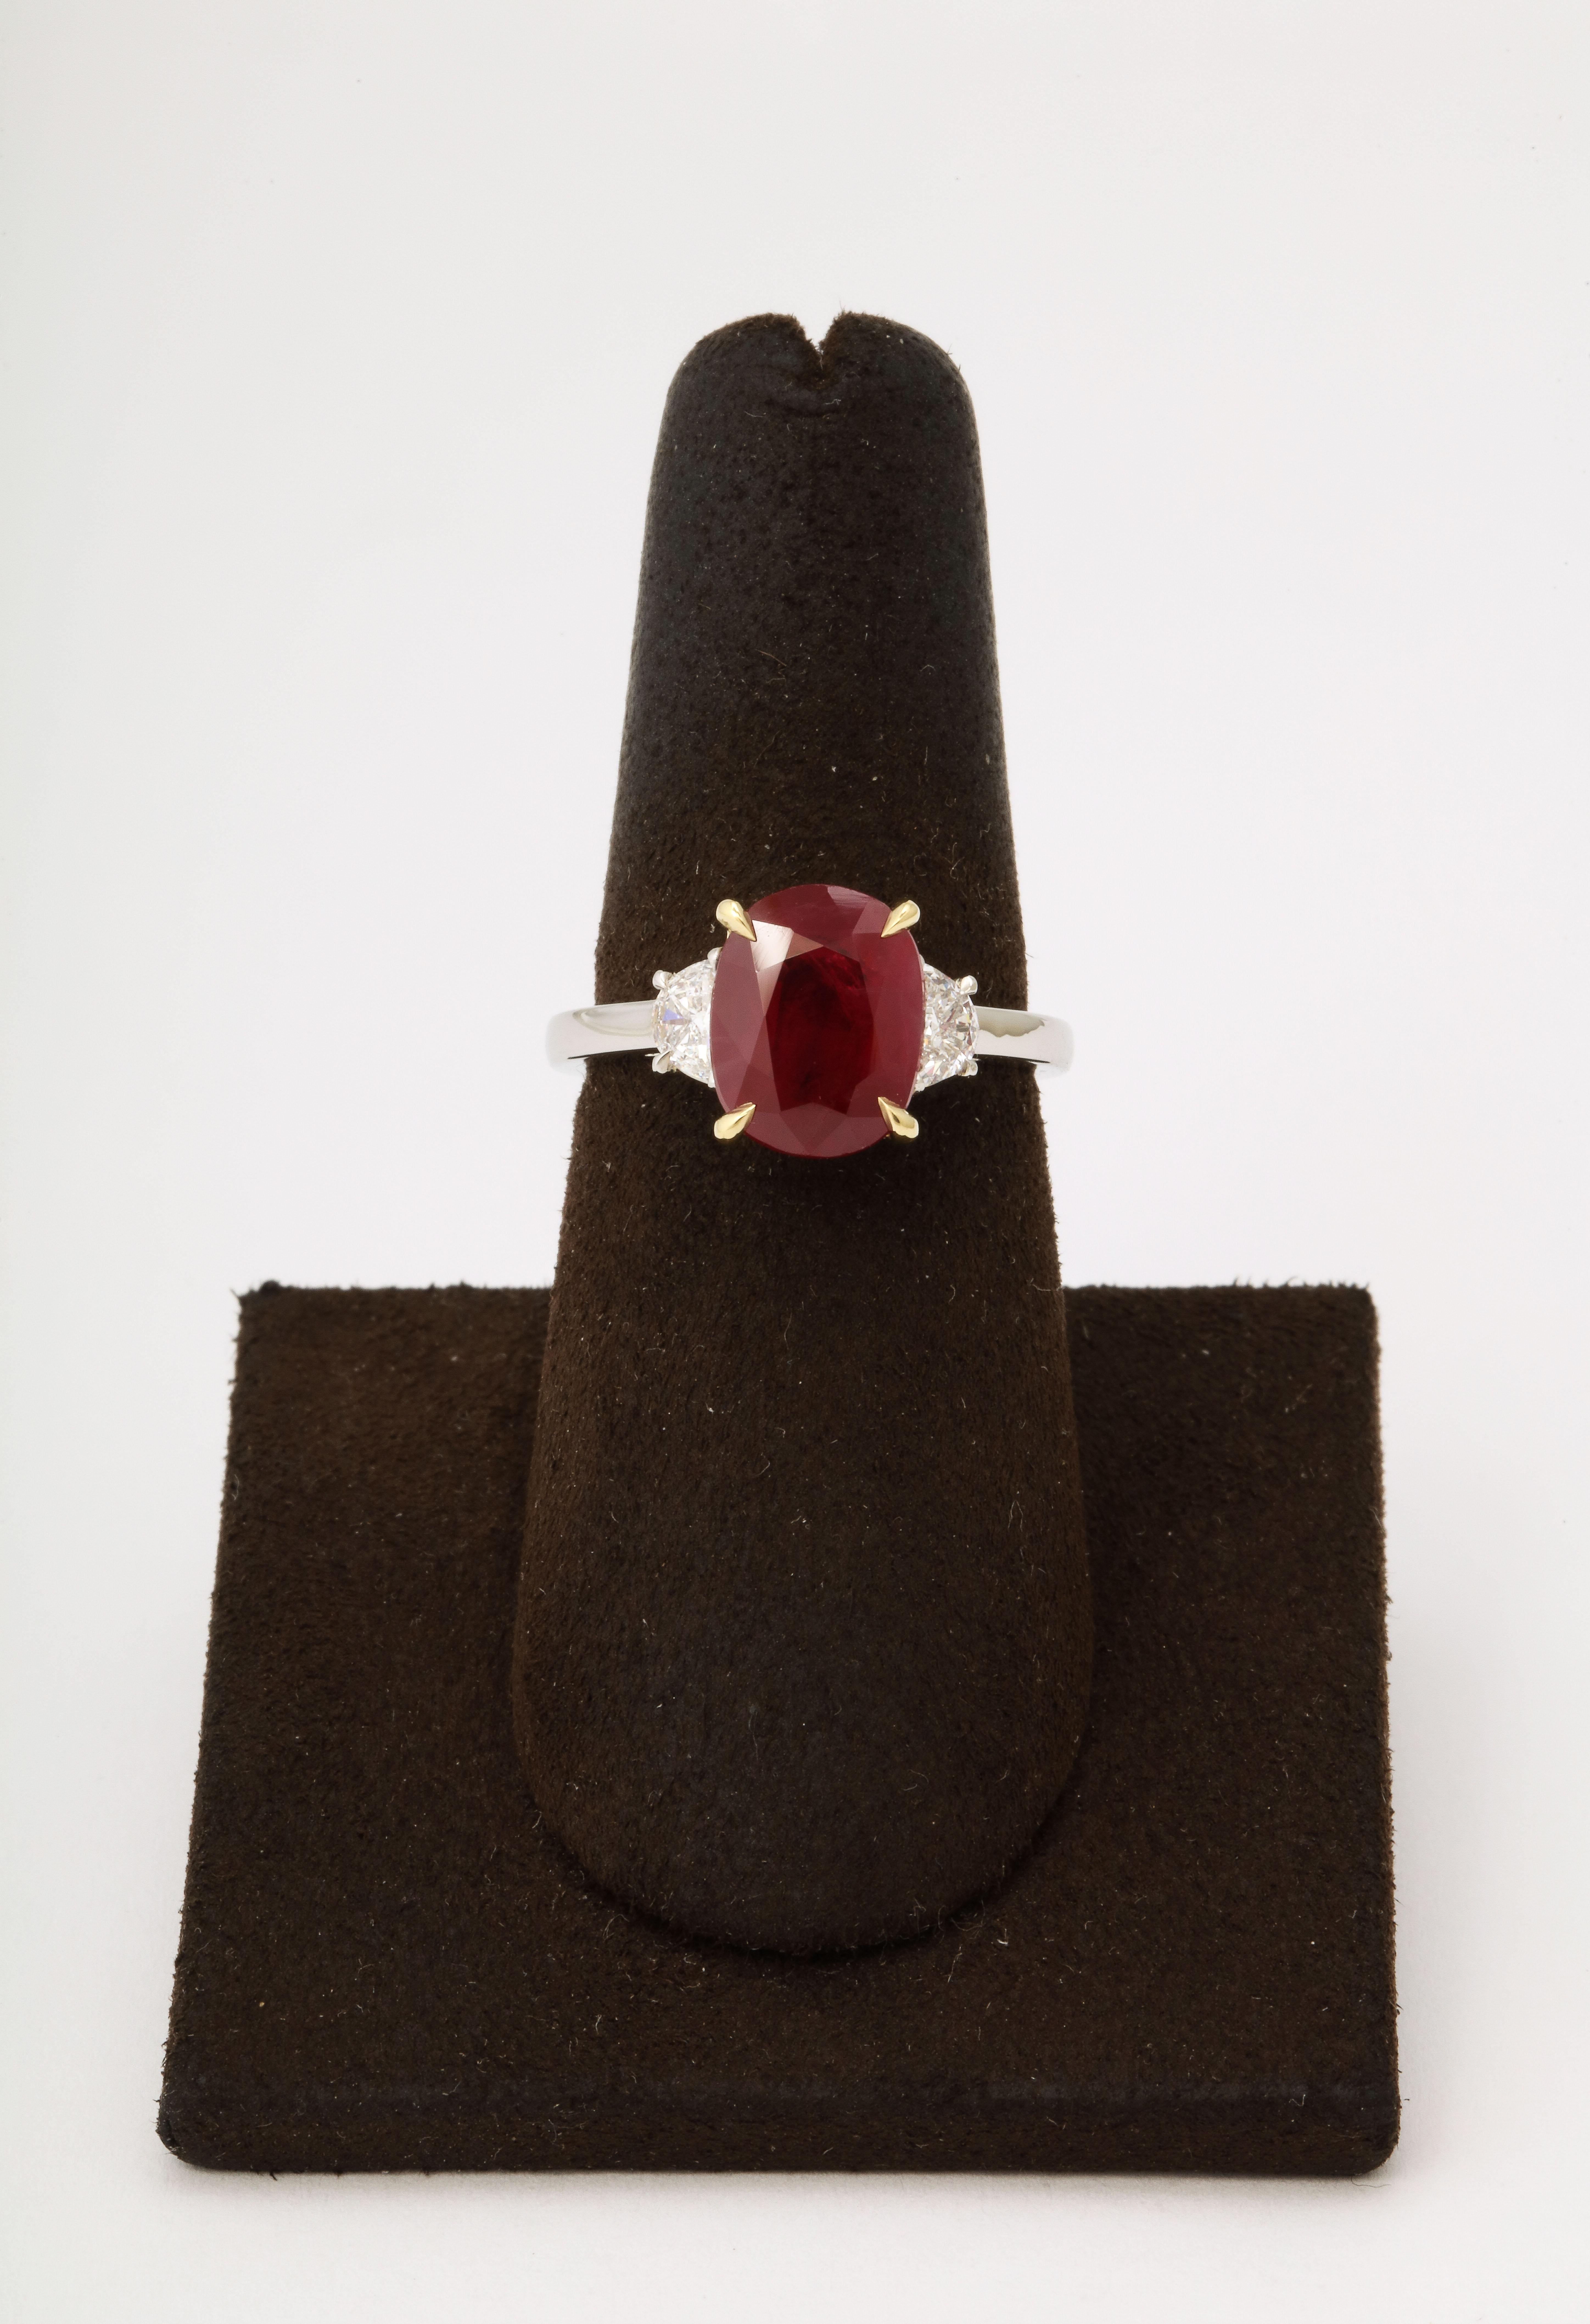 
2.97 carat certified Fine Burma Ruby. 

.38 carats of size diamonds.

Set in platinum and 18k yellow gold 

Currently a size 6.5, this ring can easily be resized. 

Certified by Christian Dunaigre of Switzerland. The certificate is available on